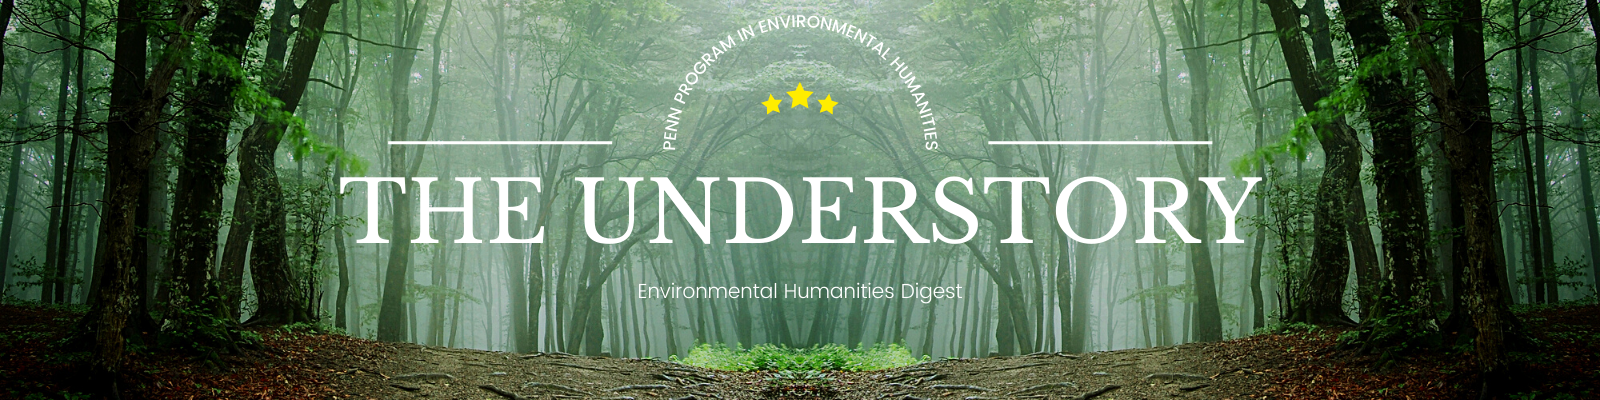 Header image of view of lush green forest from the floor, text of The Understory Environmental Humanities Digest